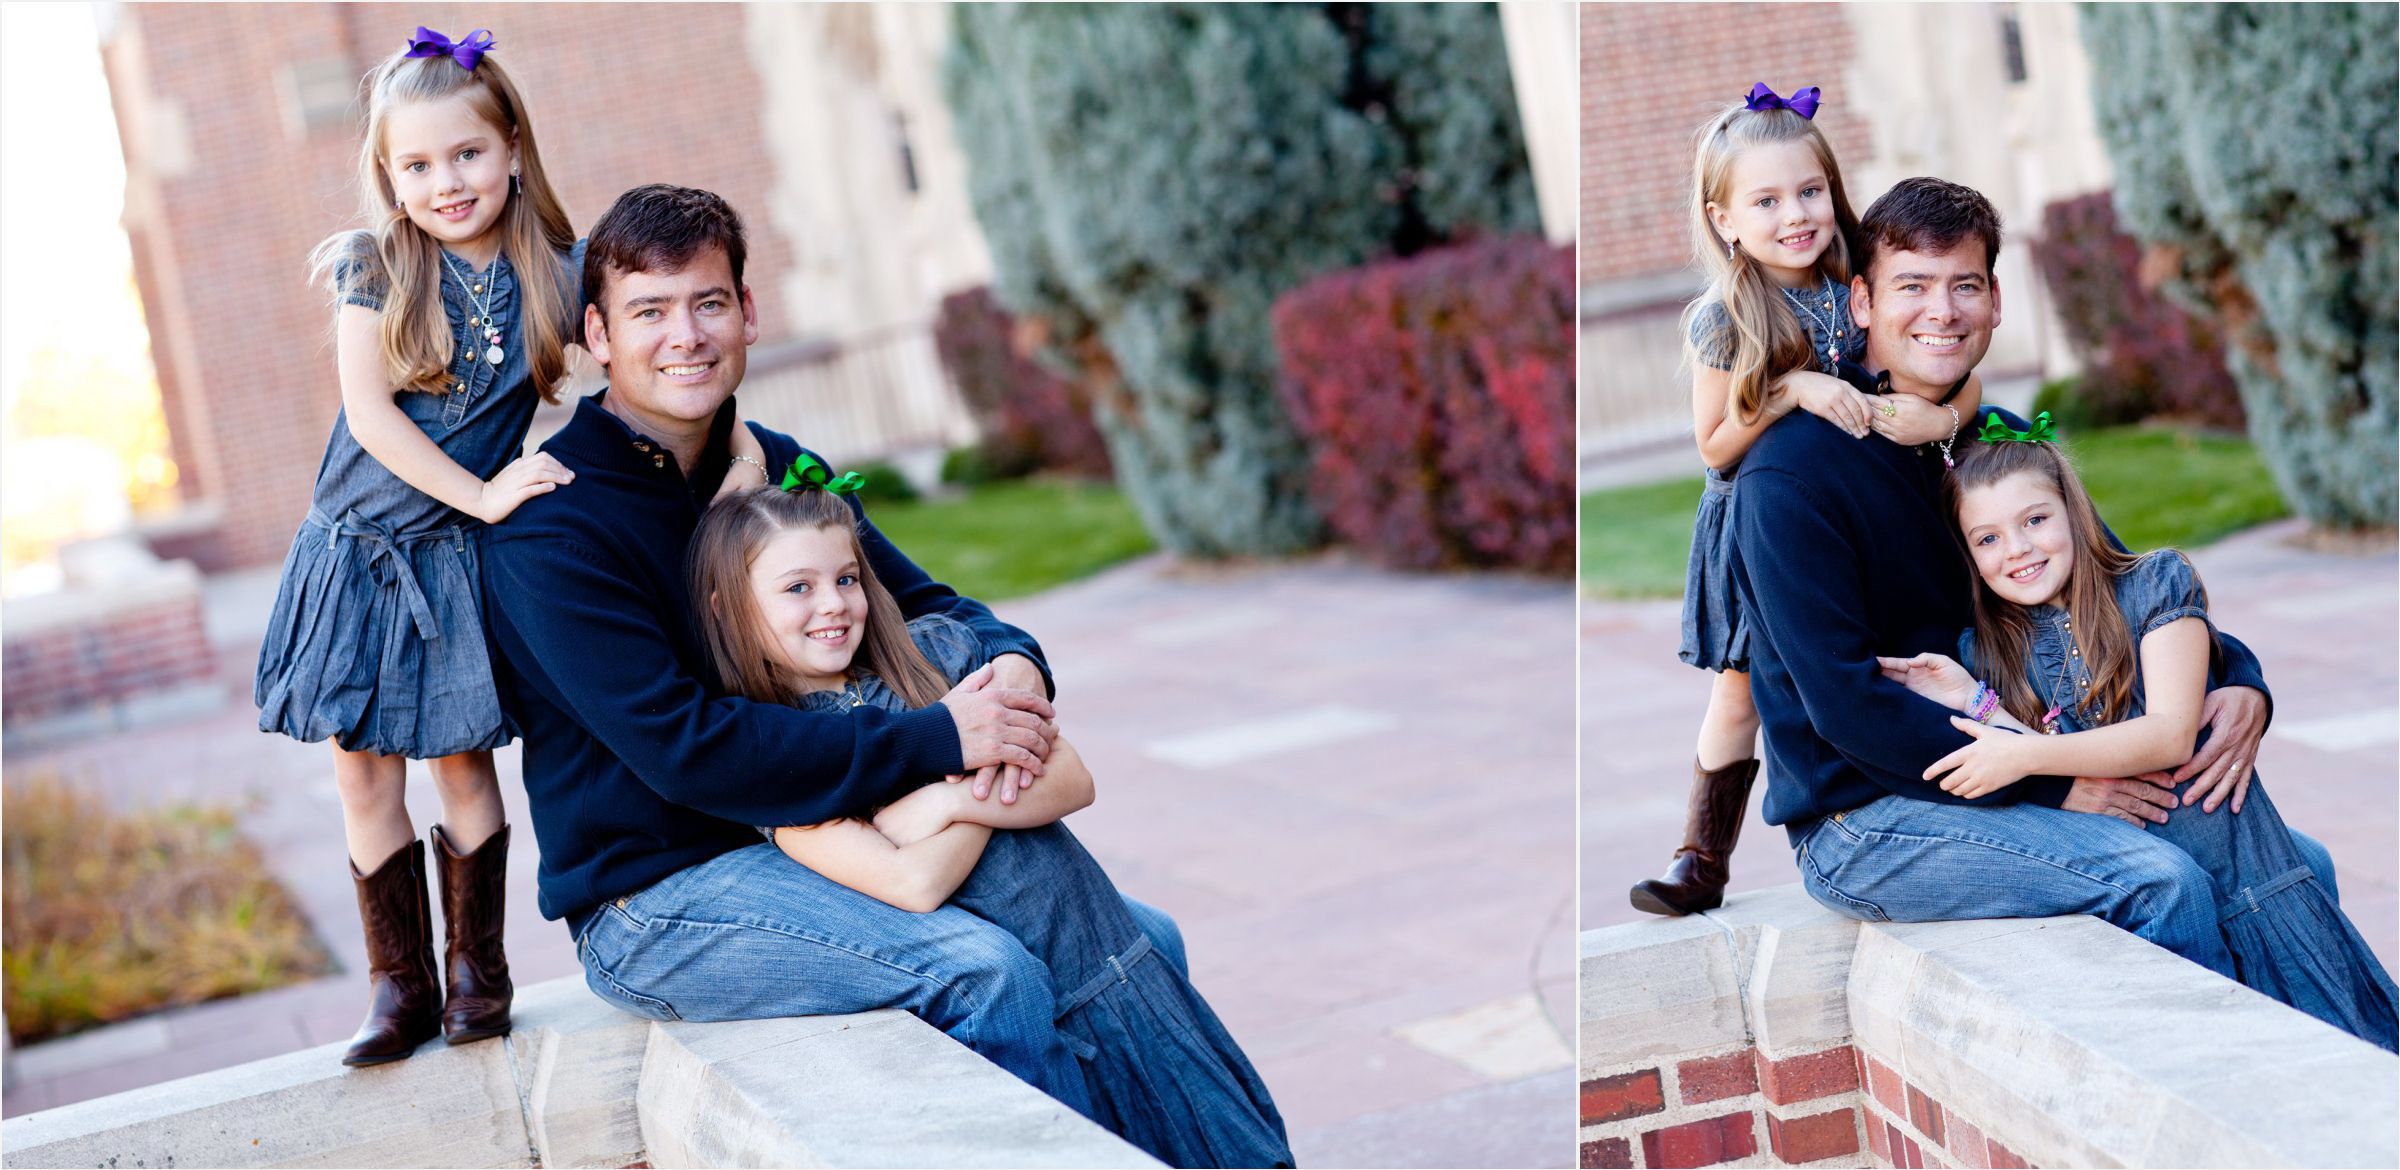 father-daughter-lifestyle-photo-shoot-at-denver-university-002